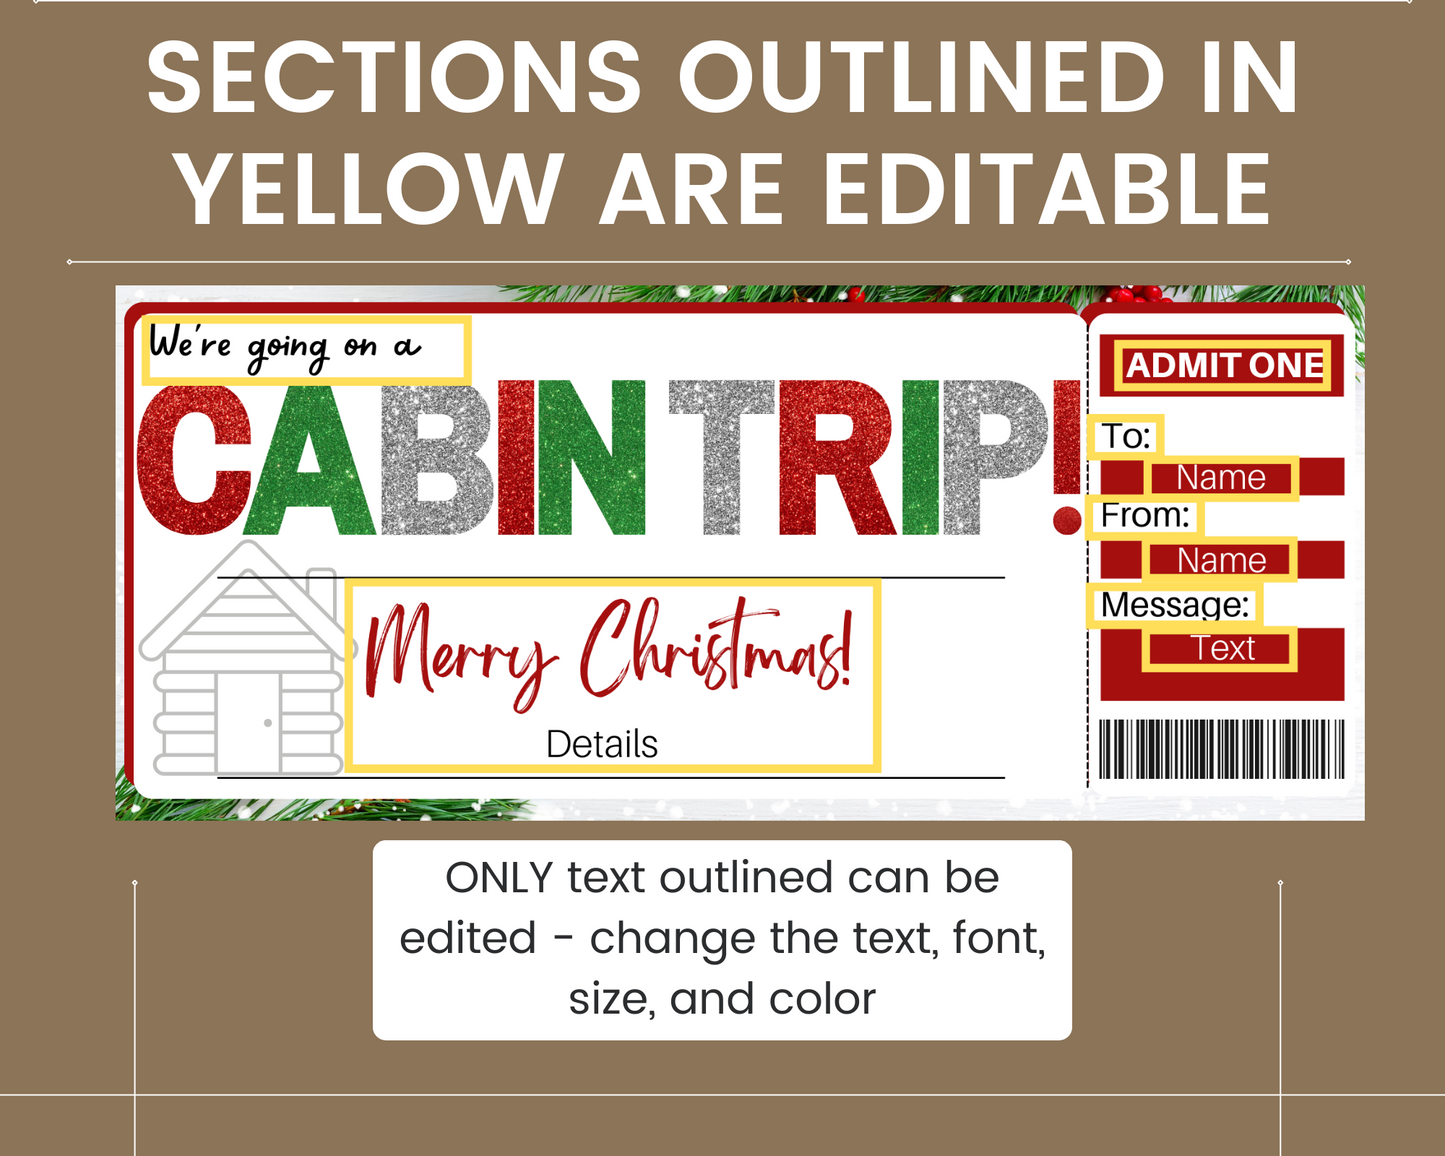 Christmas Cabin Trip Gift Ticket Template